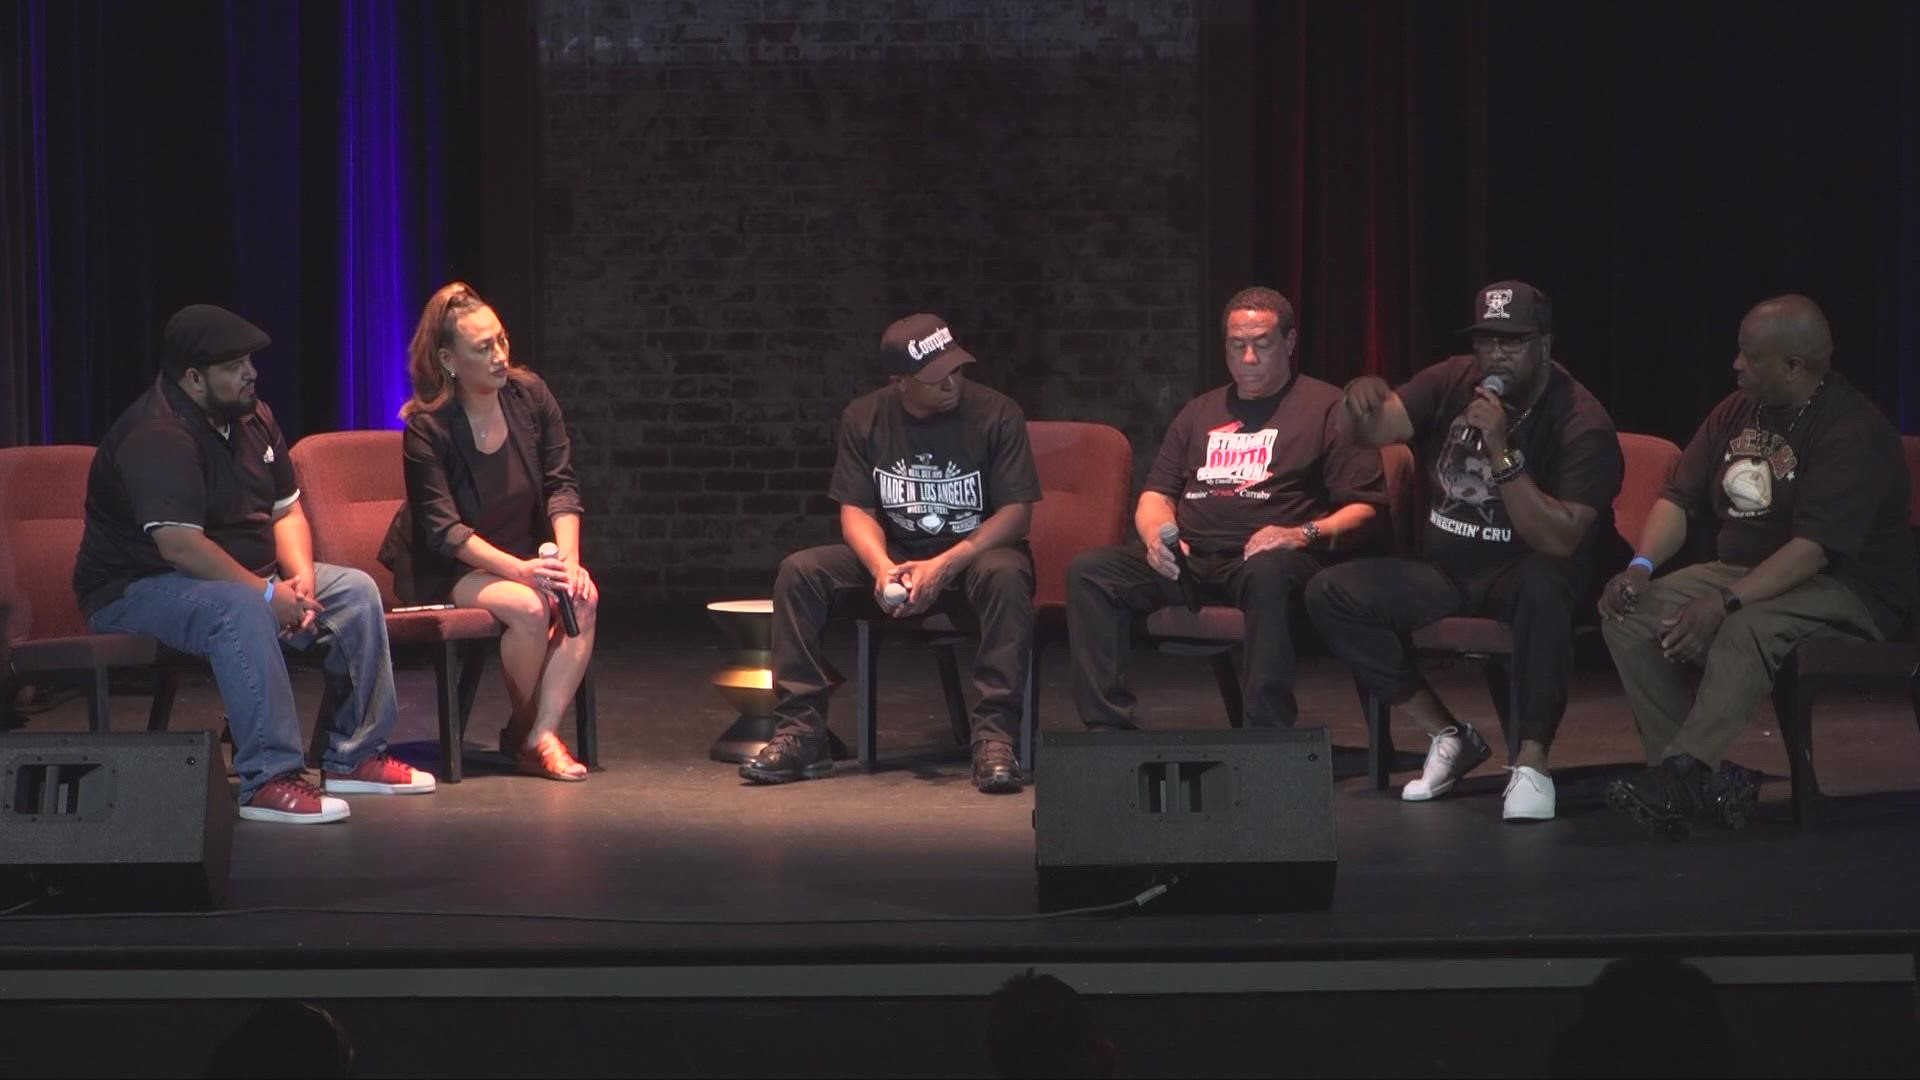 The event inside Oak Park’s Guild Theater brought members of the former hip hop group "NWA" and other rappers to talk about gun violence.